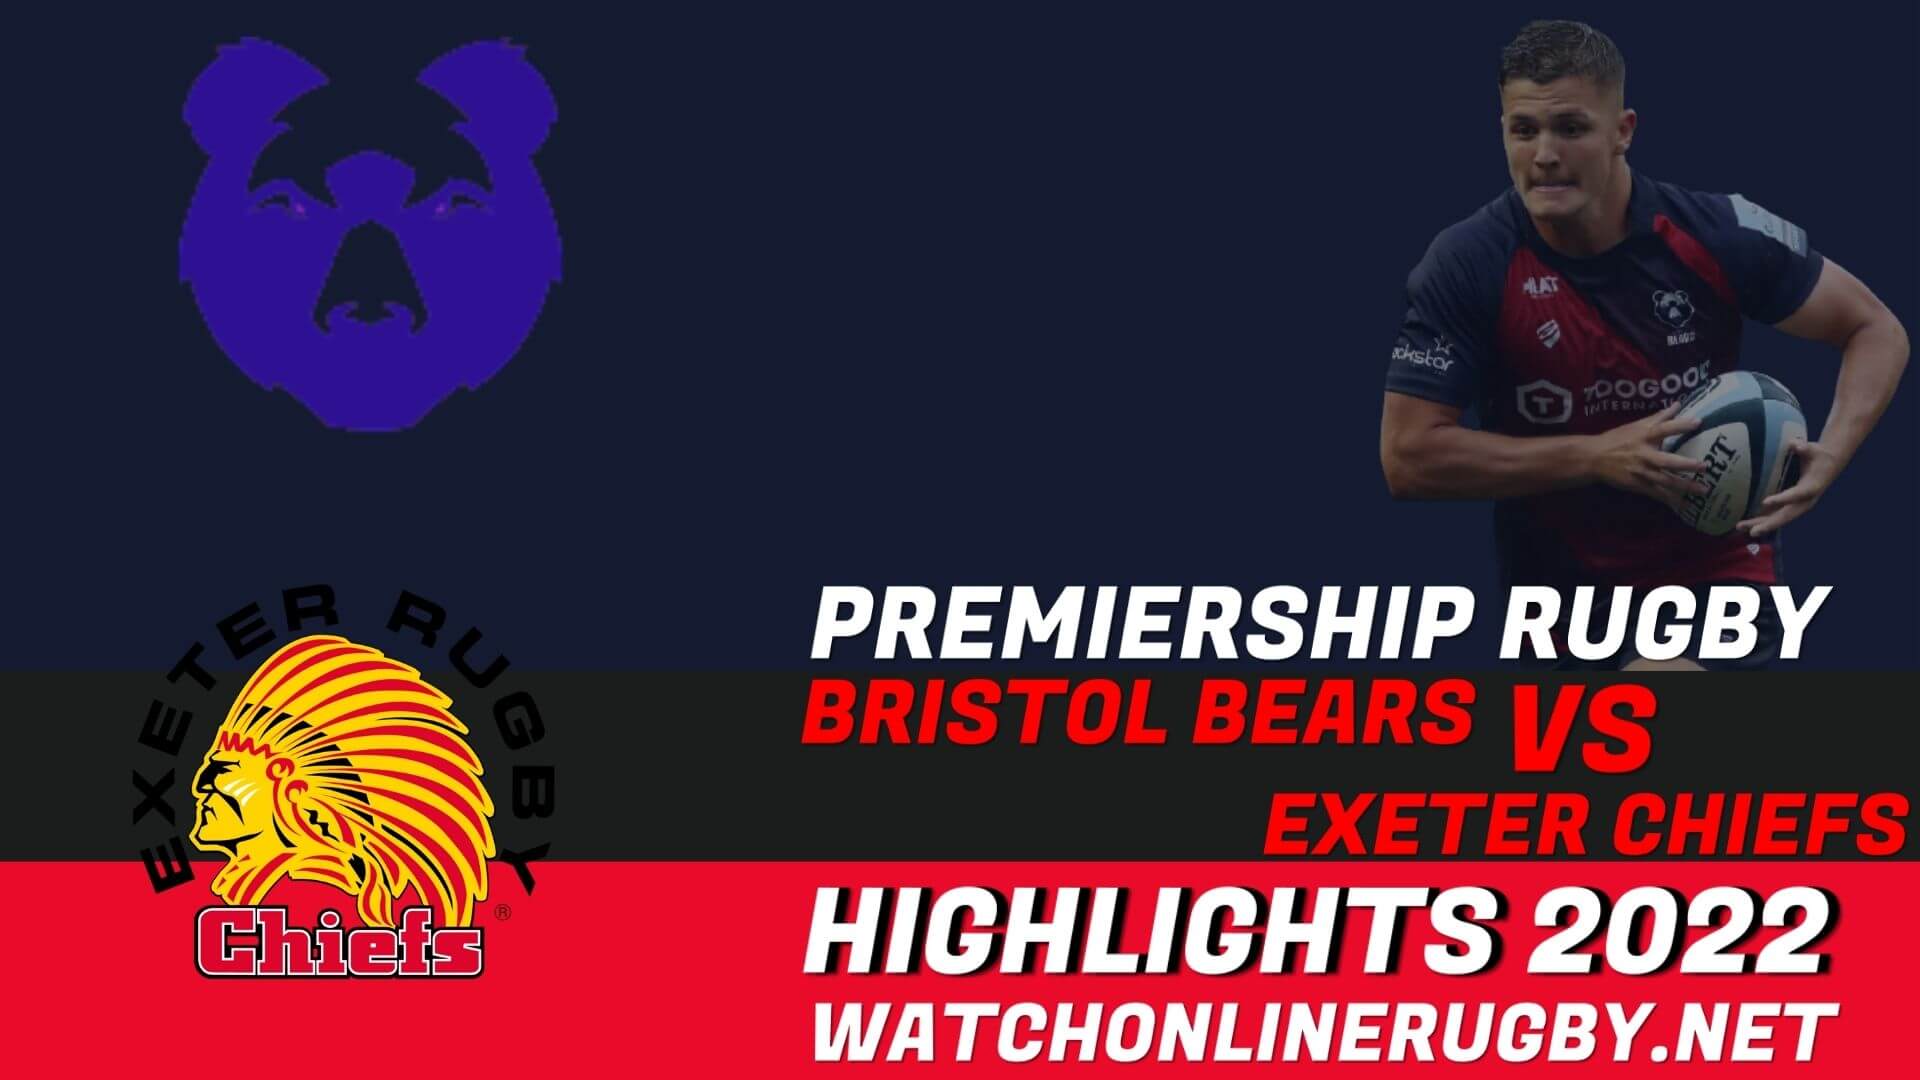 Bristol Bears Vs Exeter Chiefs Premiership Rugby 2022 RD 25